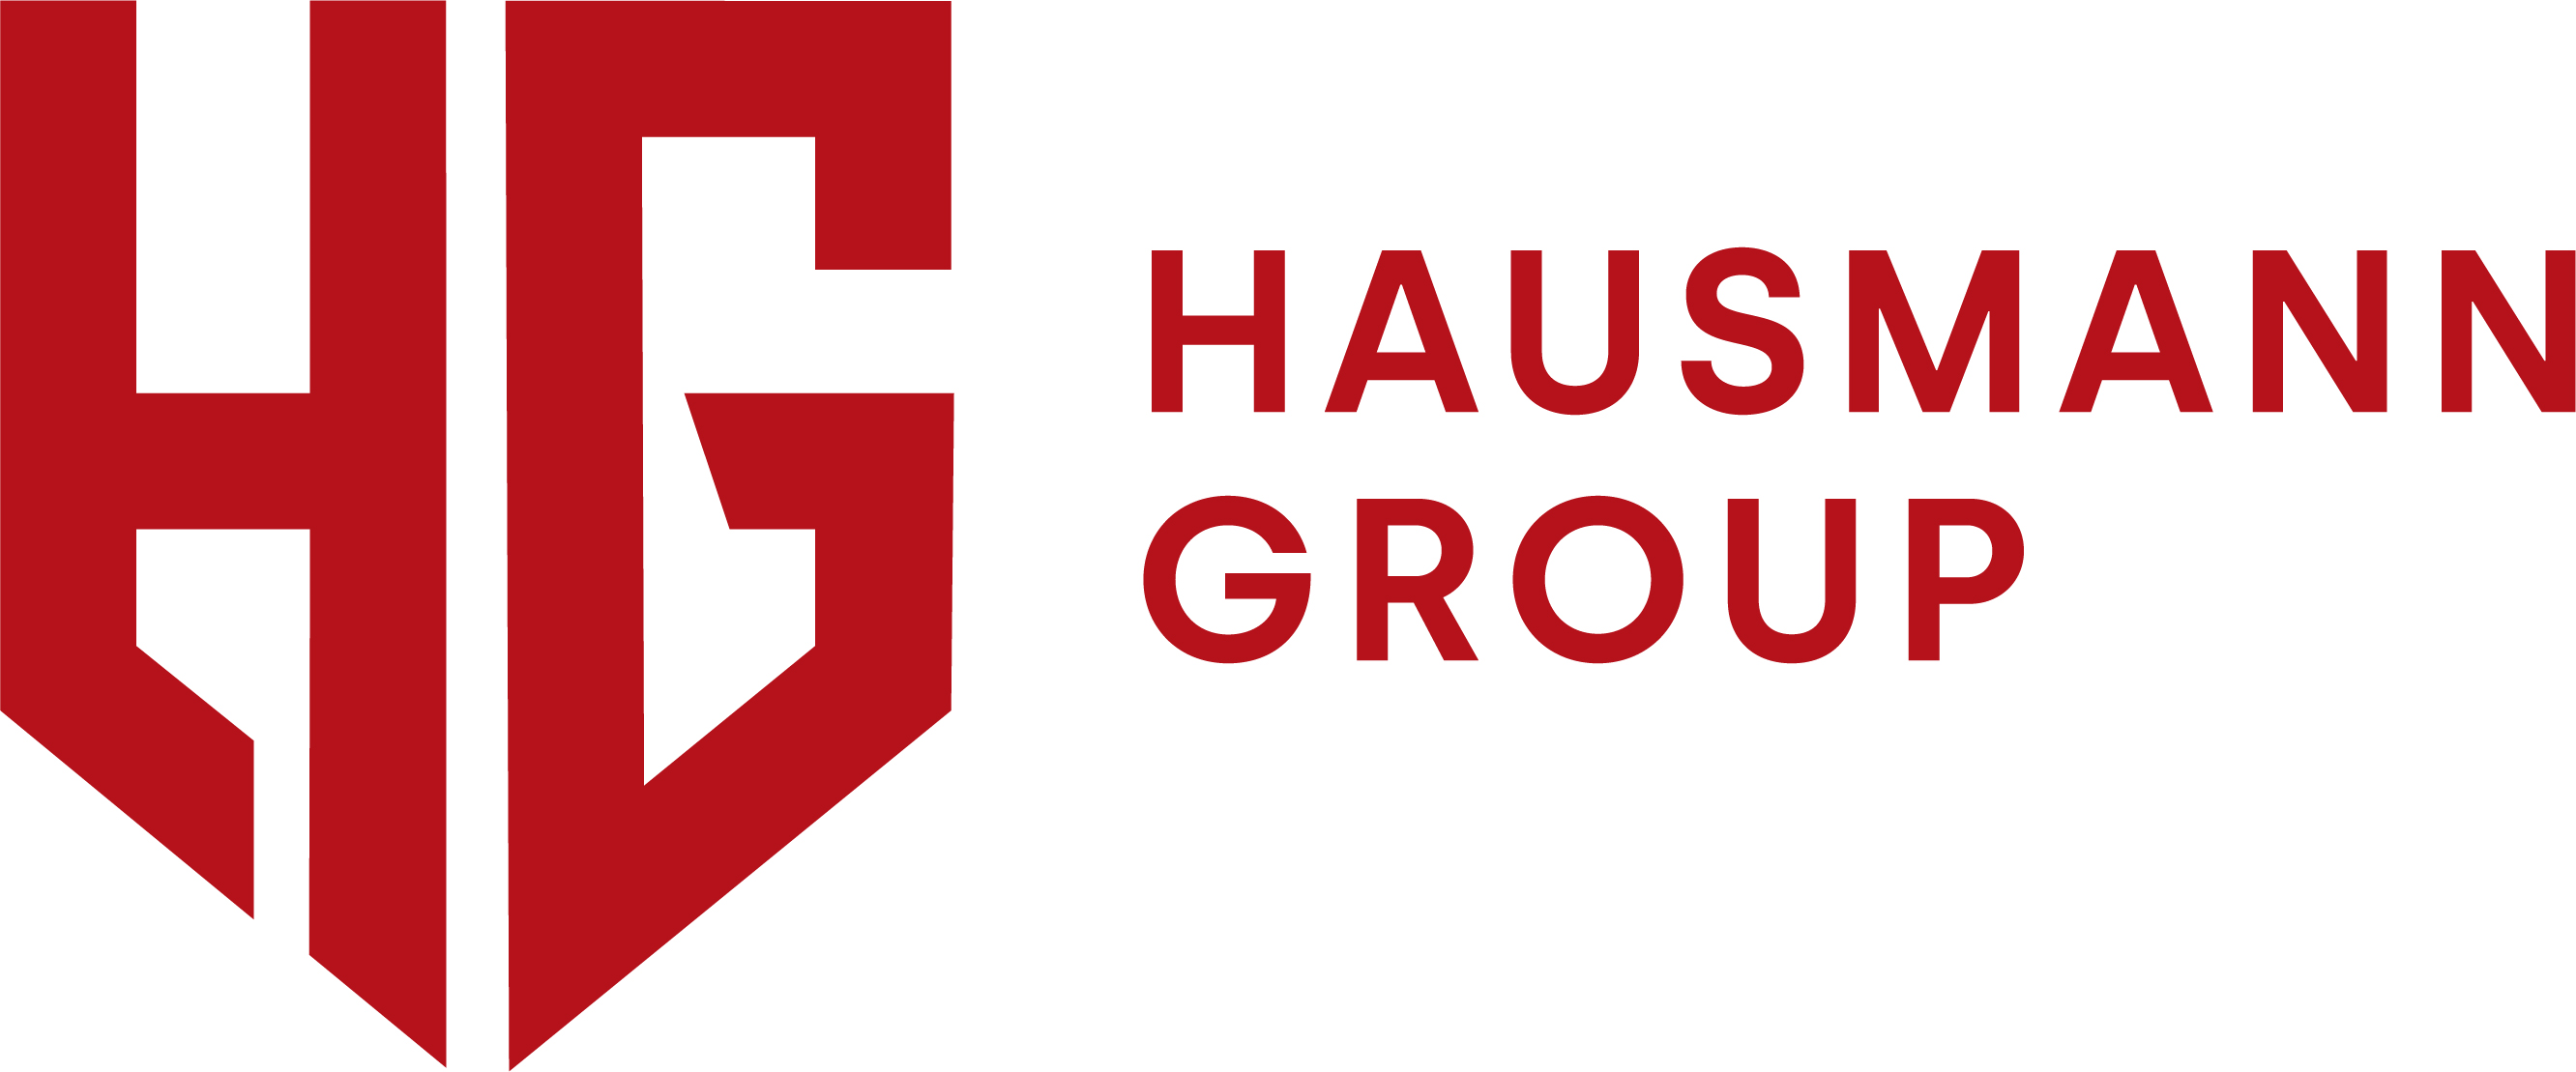 The Hausmann Group - Claims Resolution Strategist - Property & Liability